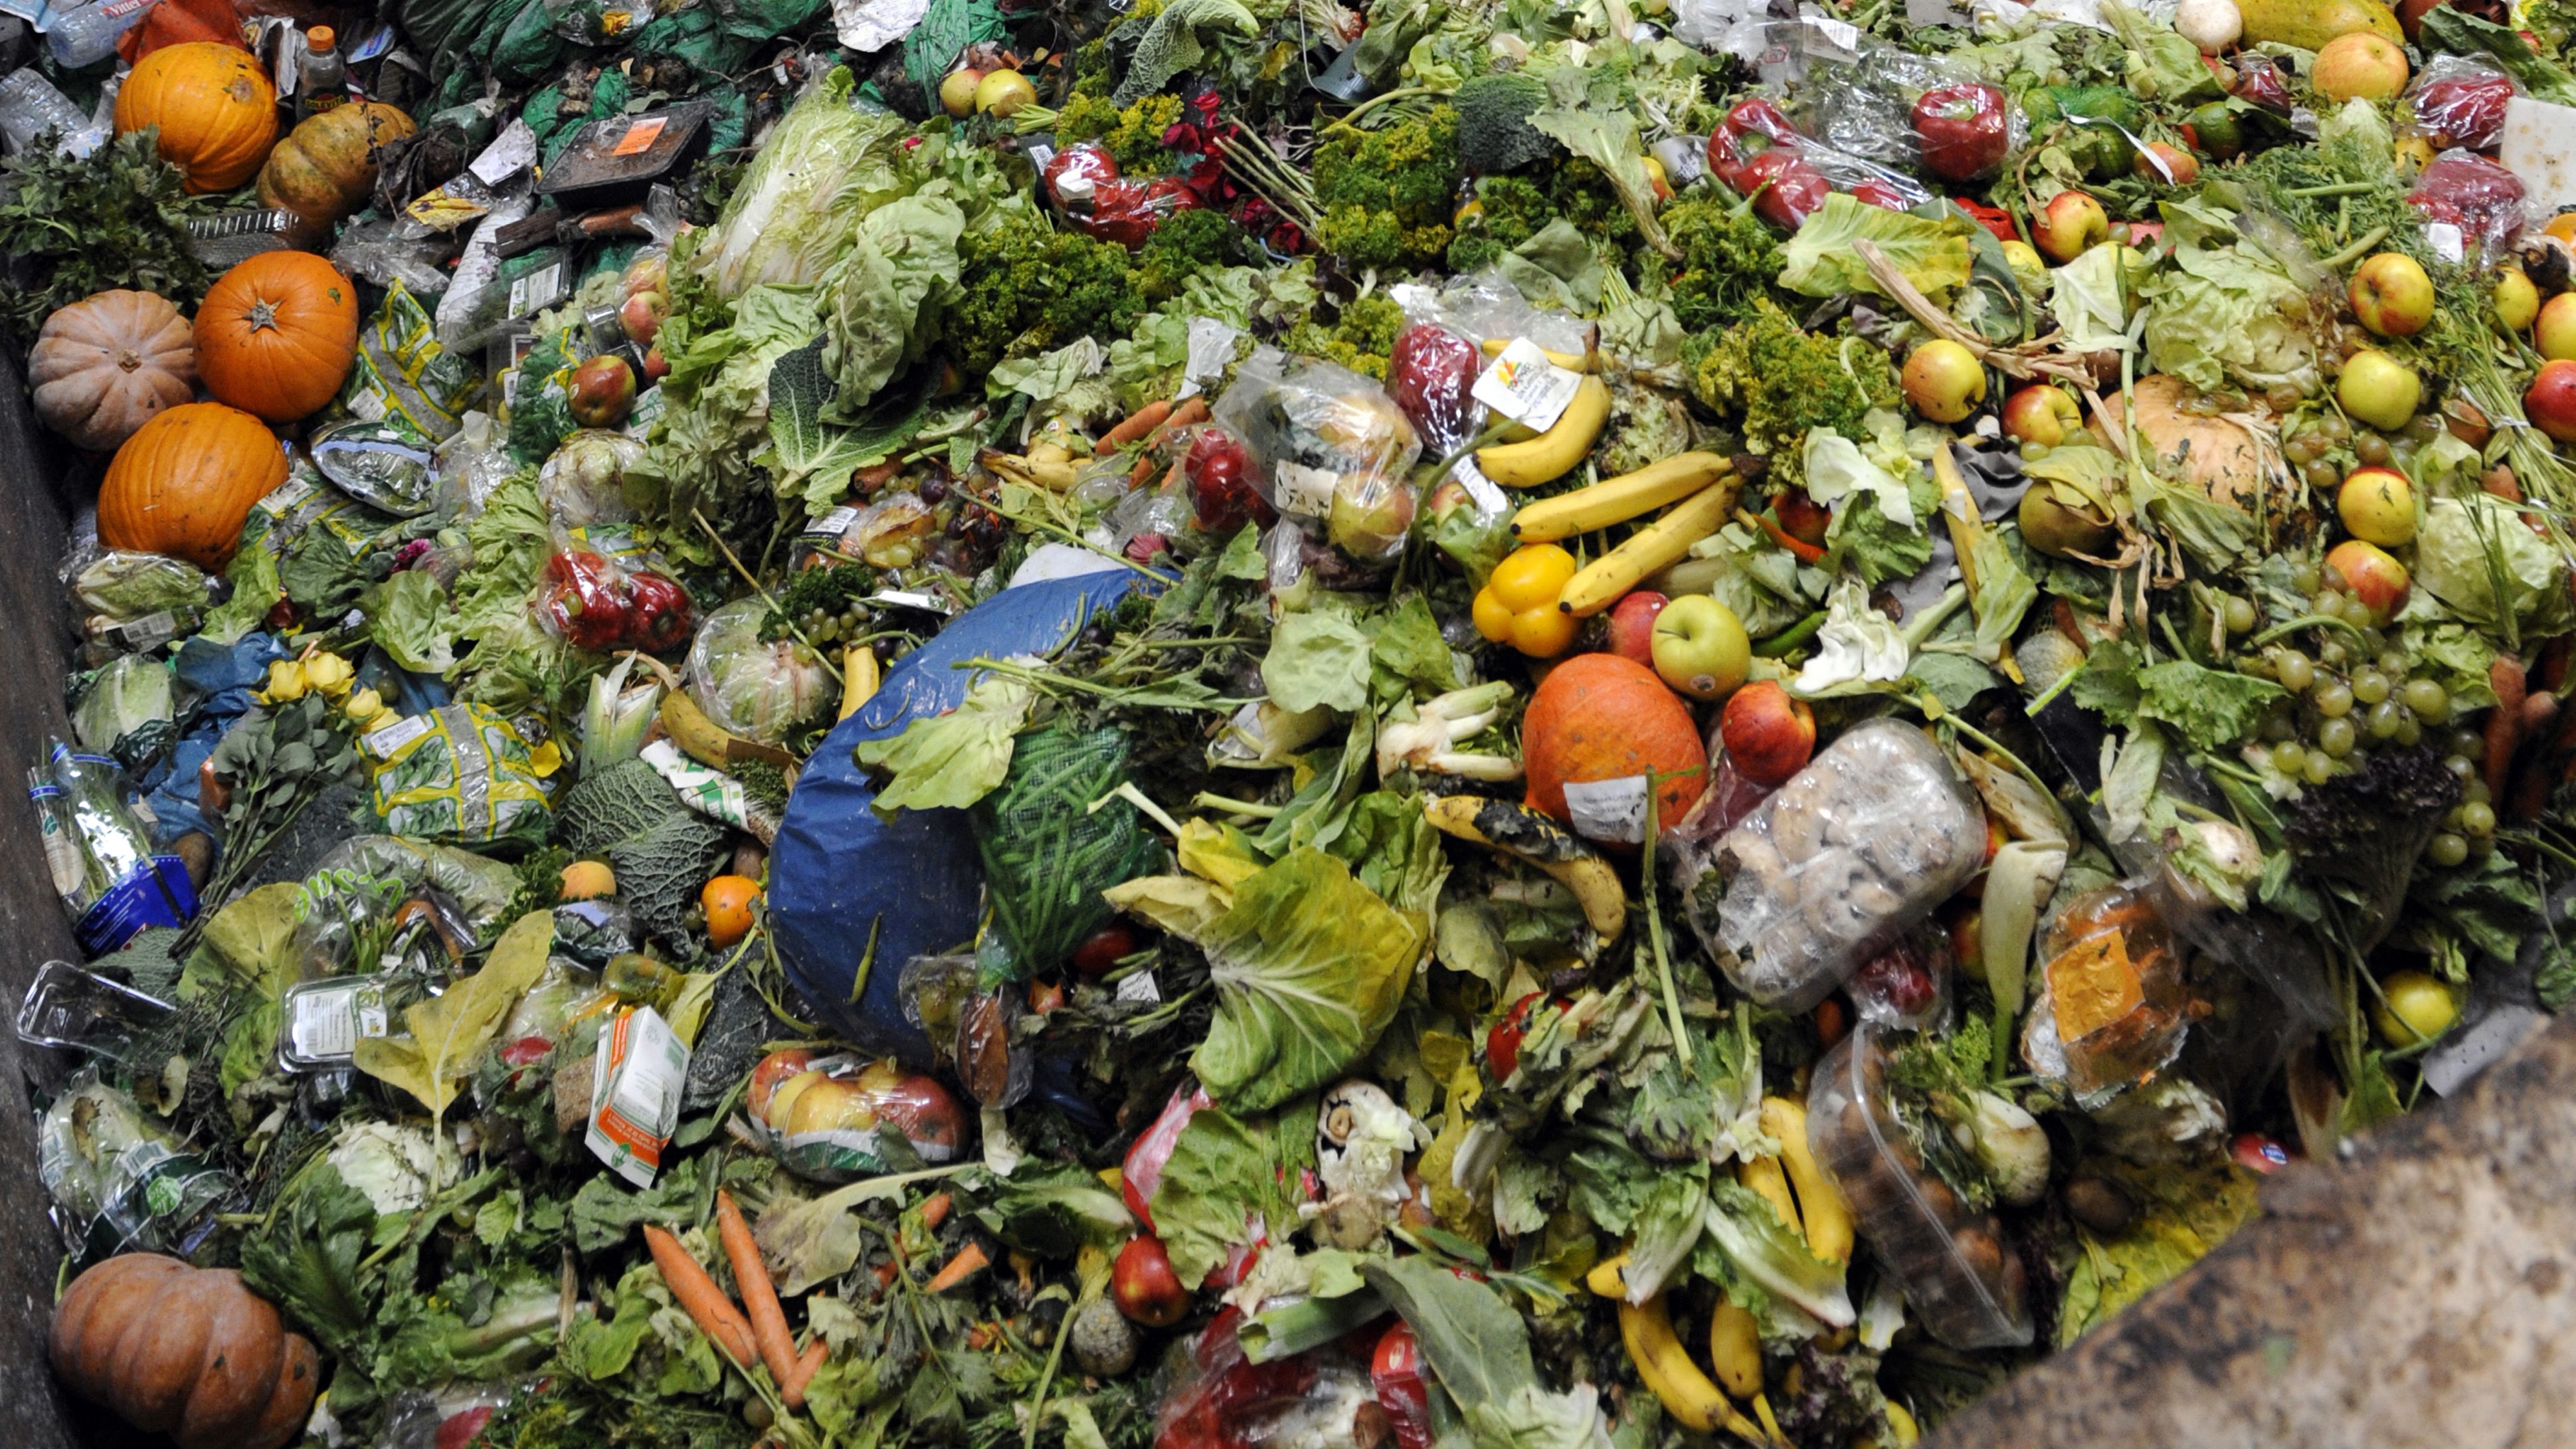 Waste food products stocked at the Methavalor factory in Morsbach, France on October 23, 2012.